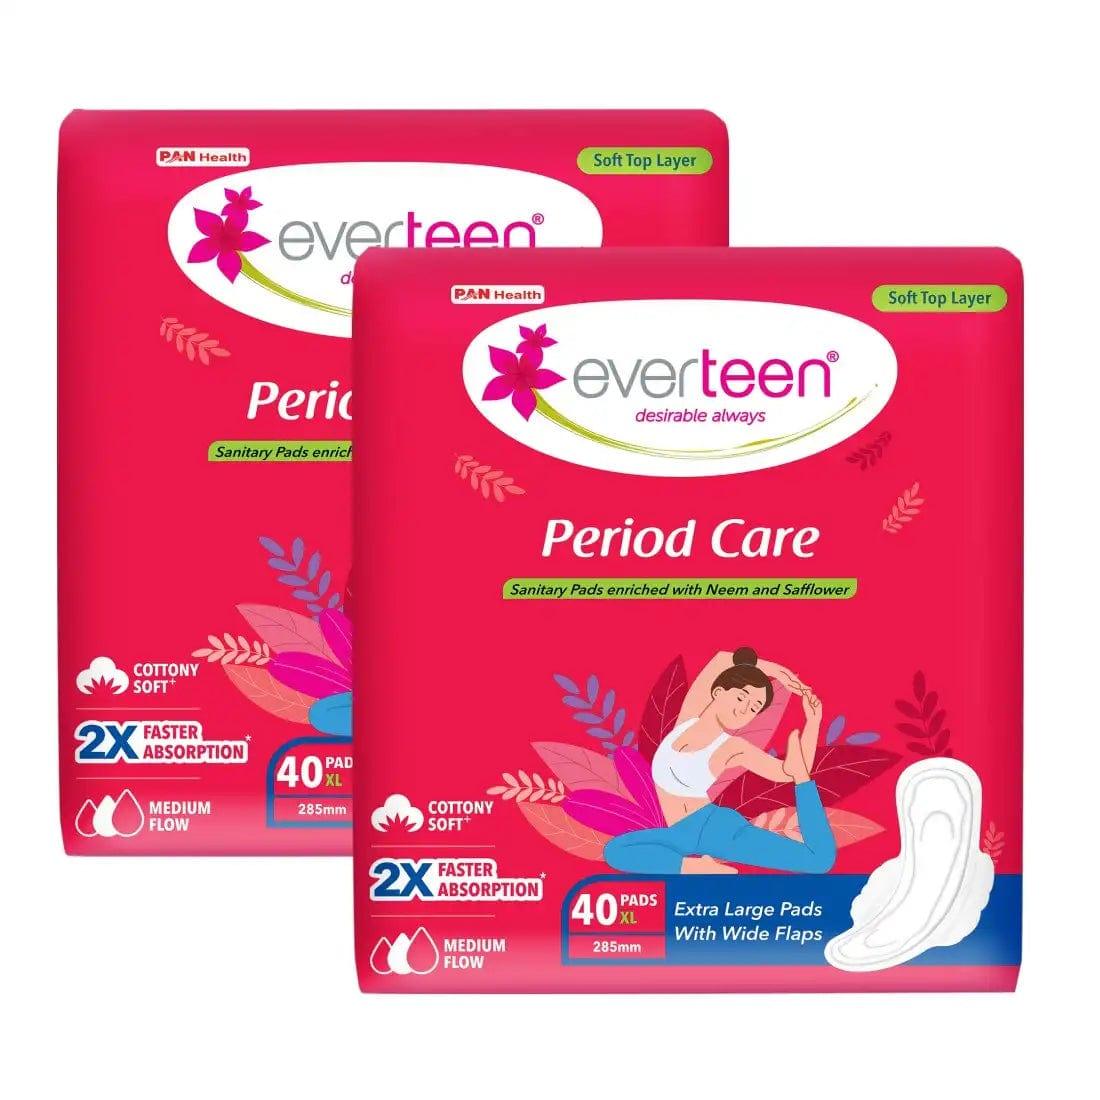 everteen Period Care XL Soft 40 Sanitary Pads Enriched with Neem and Safflower For Medium Flow 7419870767921